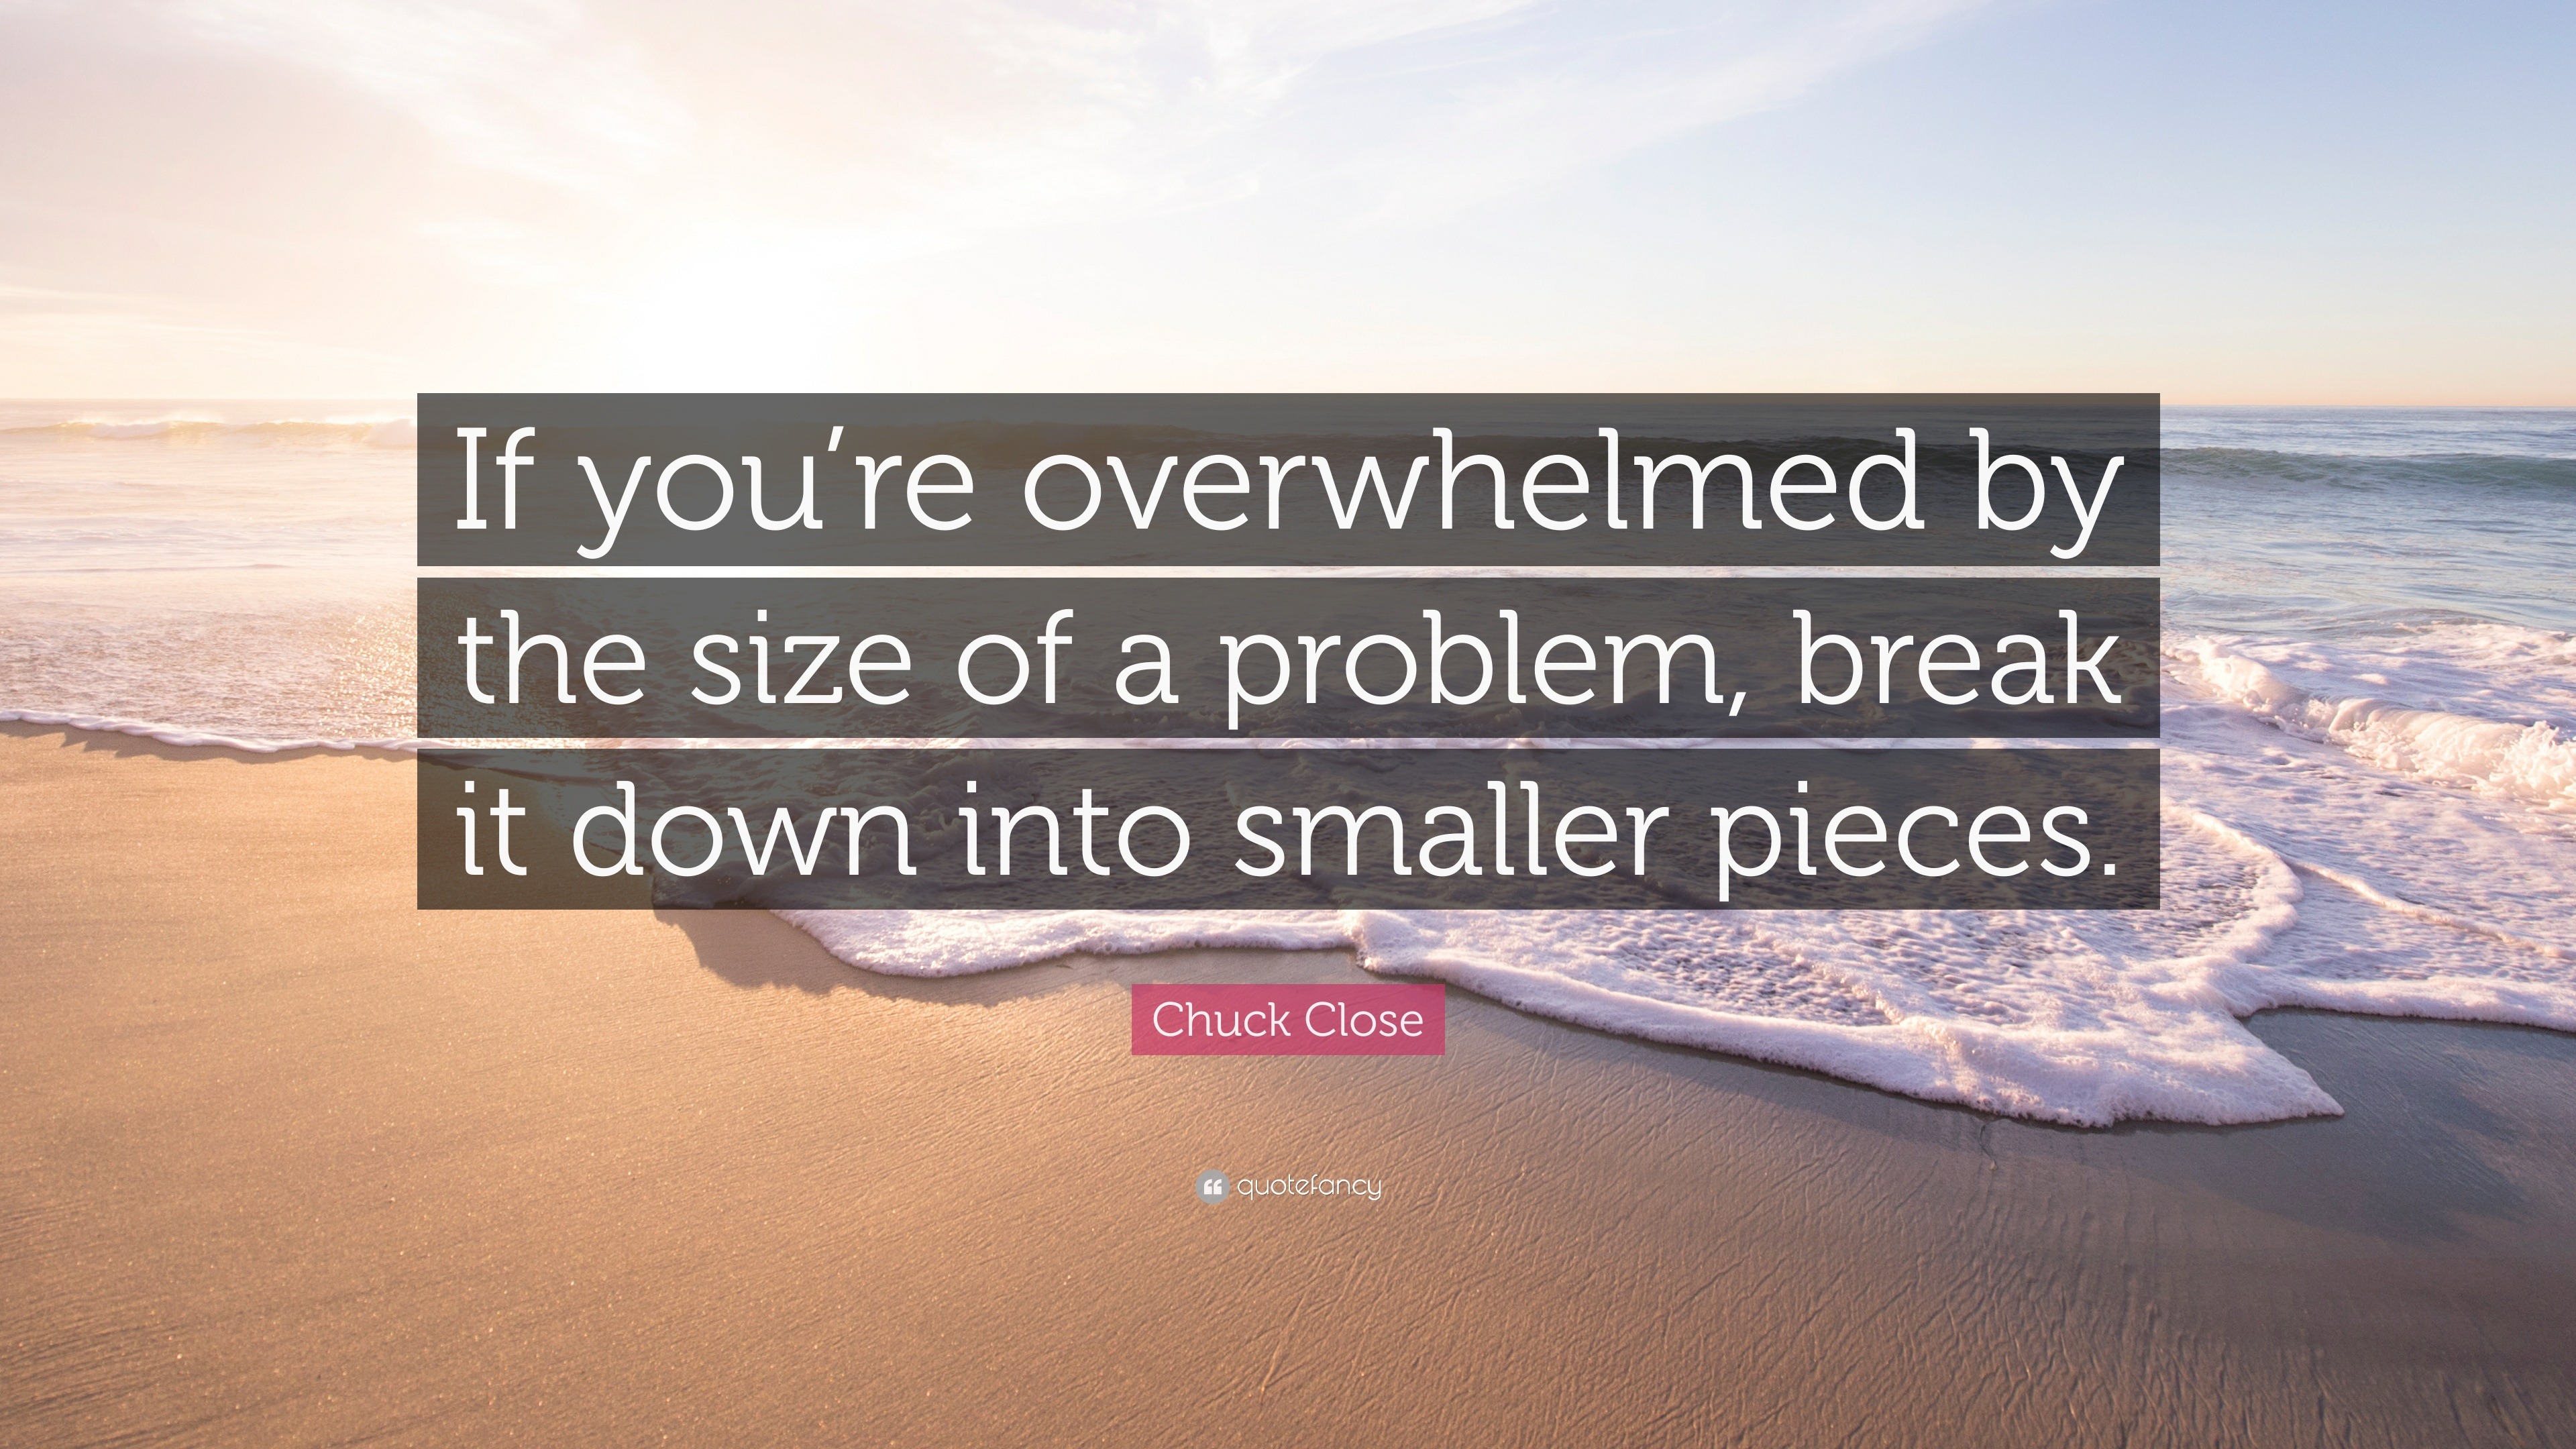 Chuck Close Quote If You Re Overwhelmed By The Size Of A Problem Break It Down